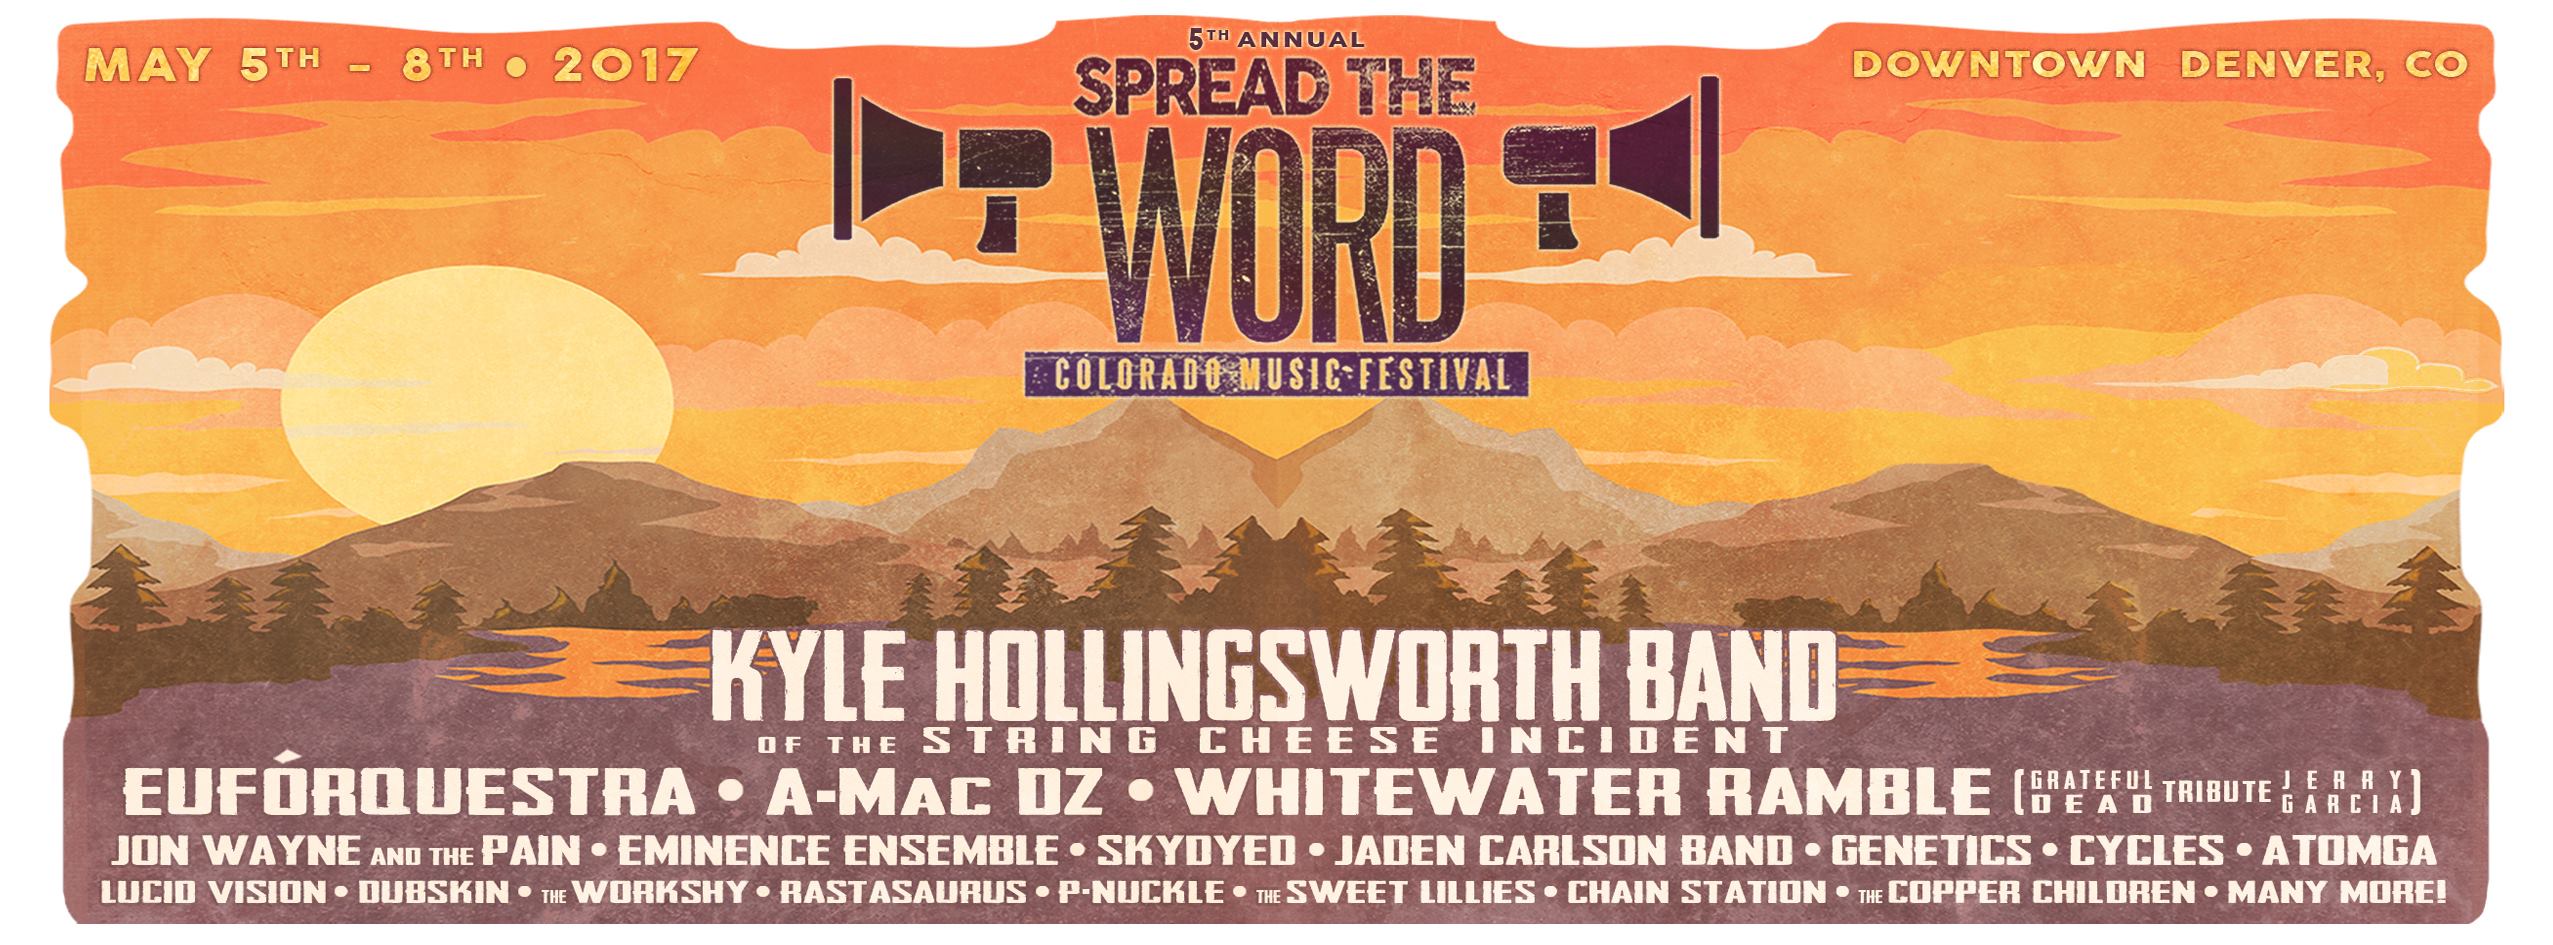 Spread The Word Music Festival '17 Lineup